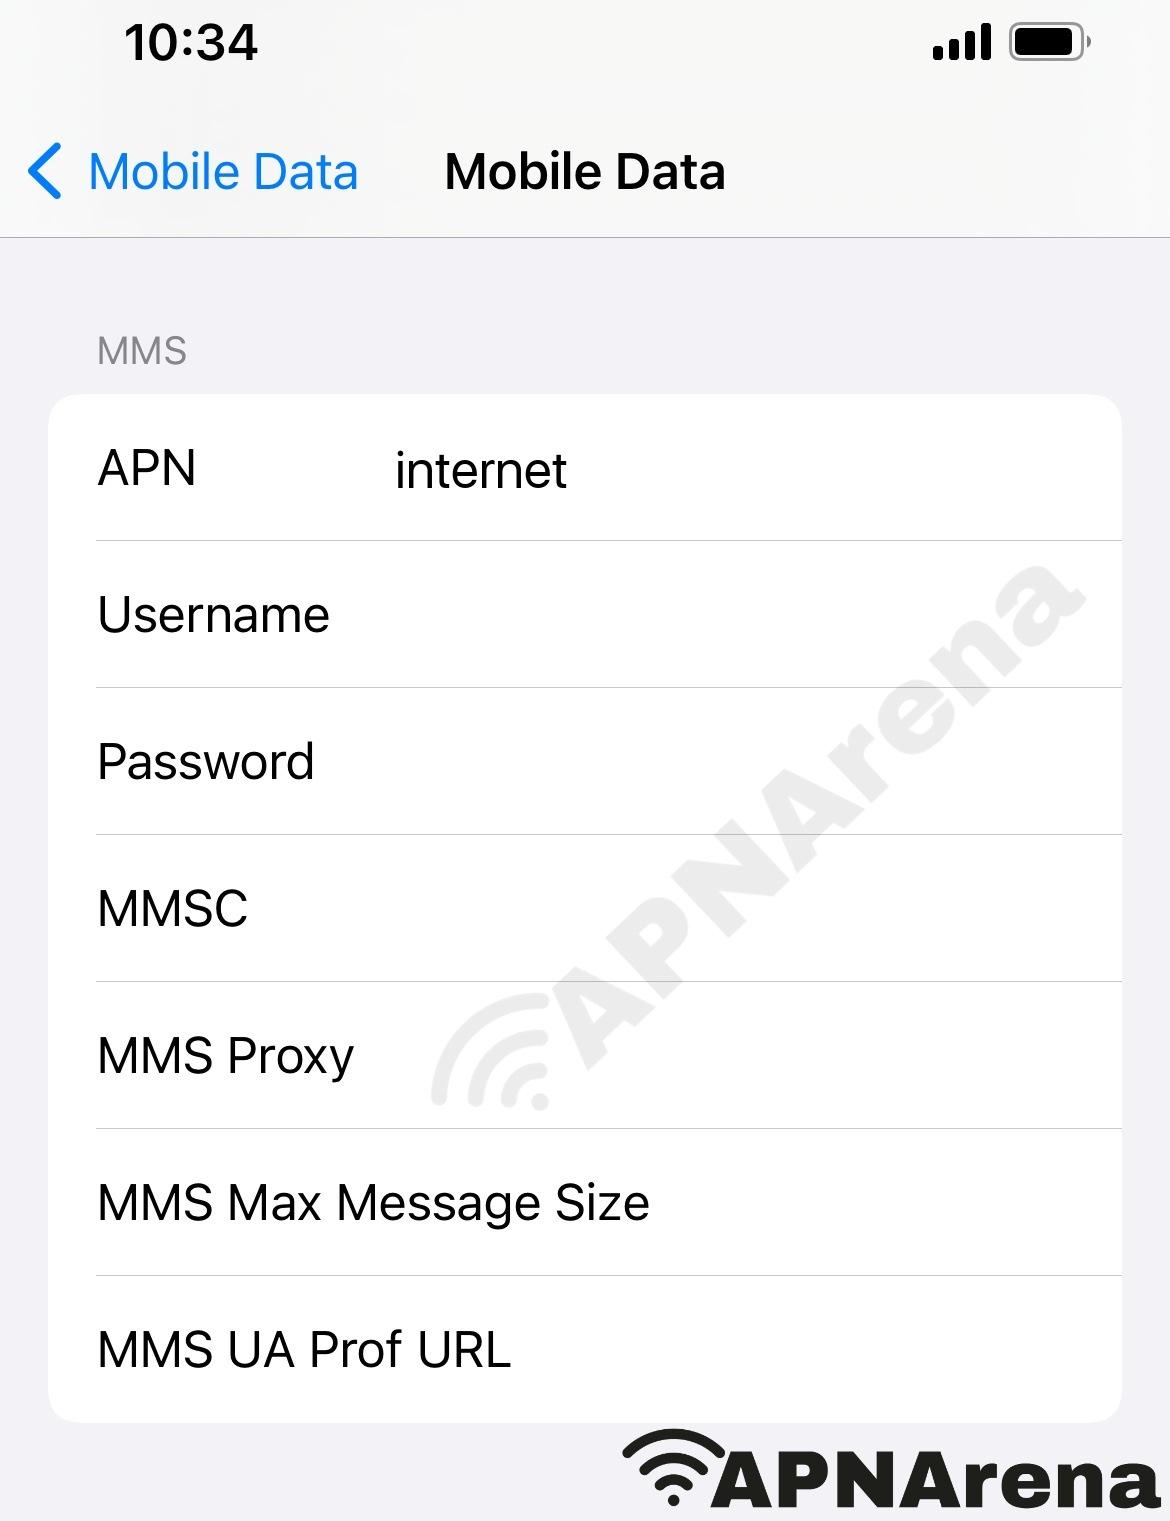 BT Mobile MMS Settings for iPhone